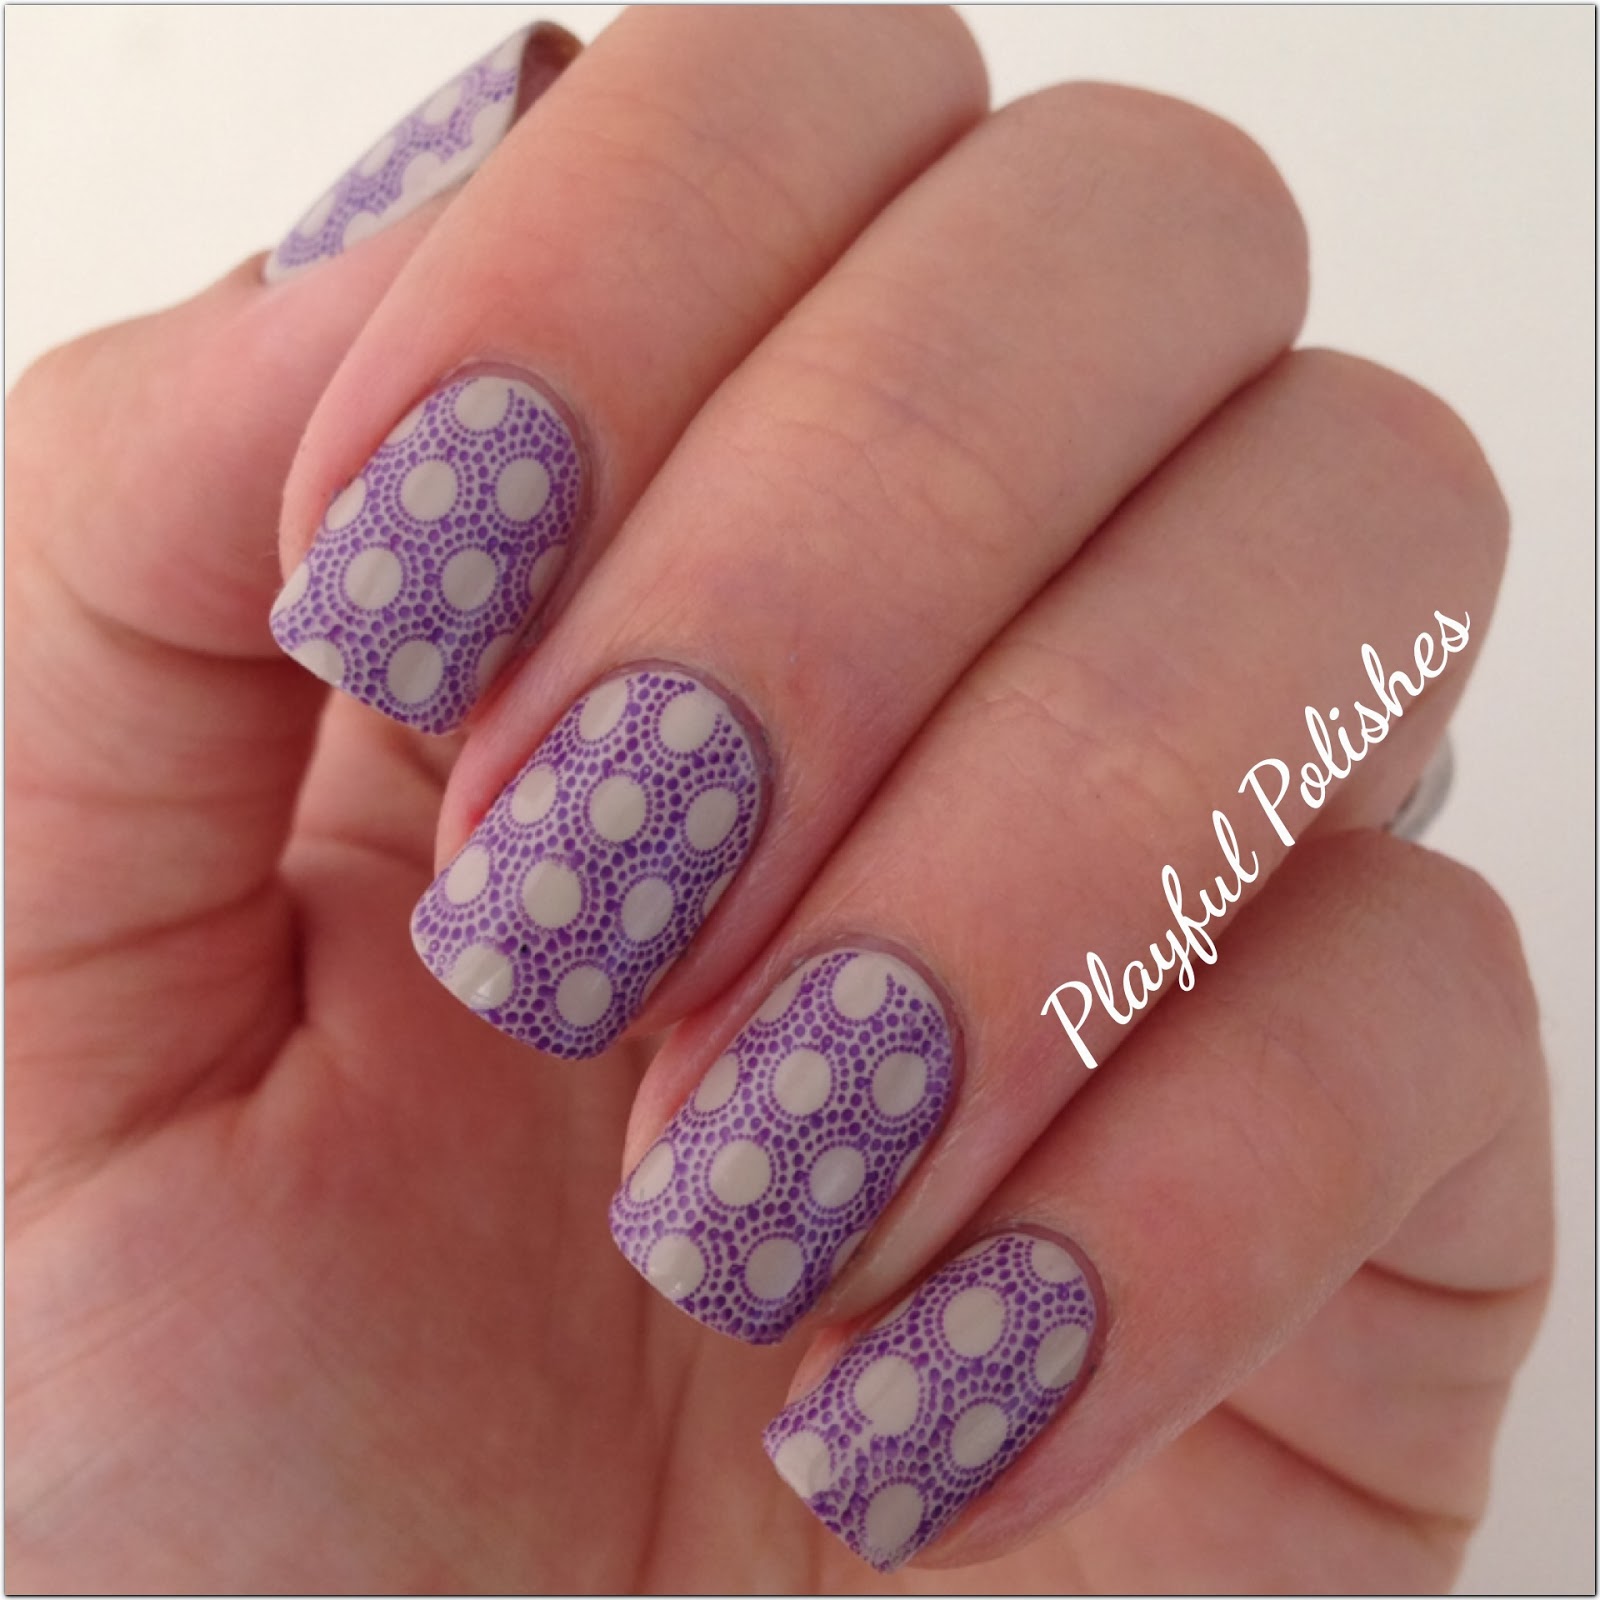 Playful Polishes: 31 DAY NAIL ART CHALLENGE: DELICATE PRINT